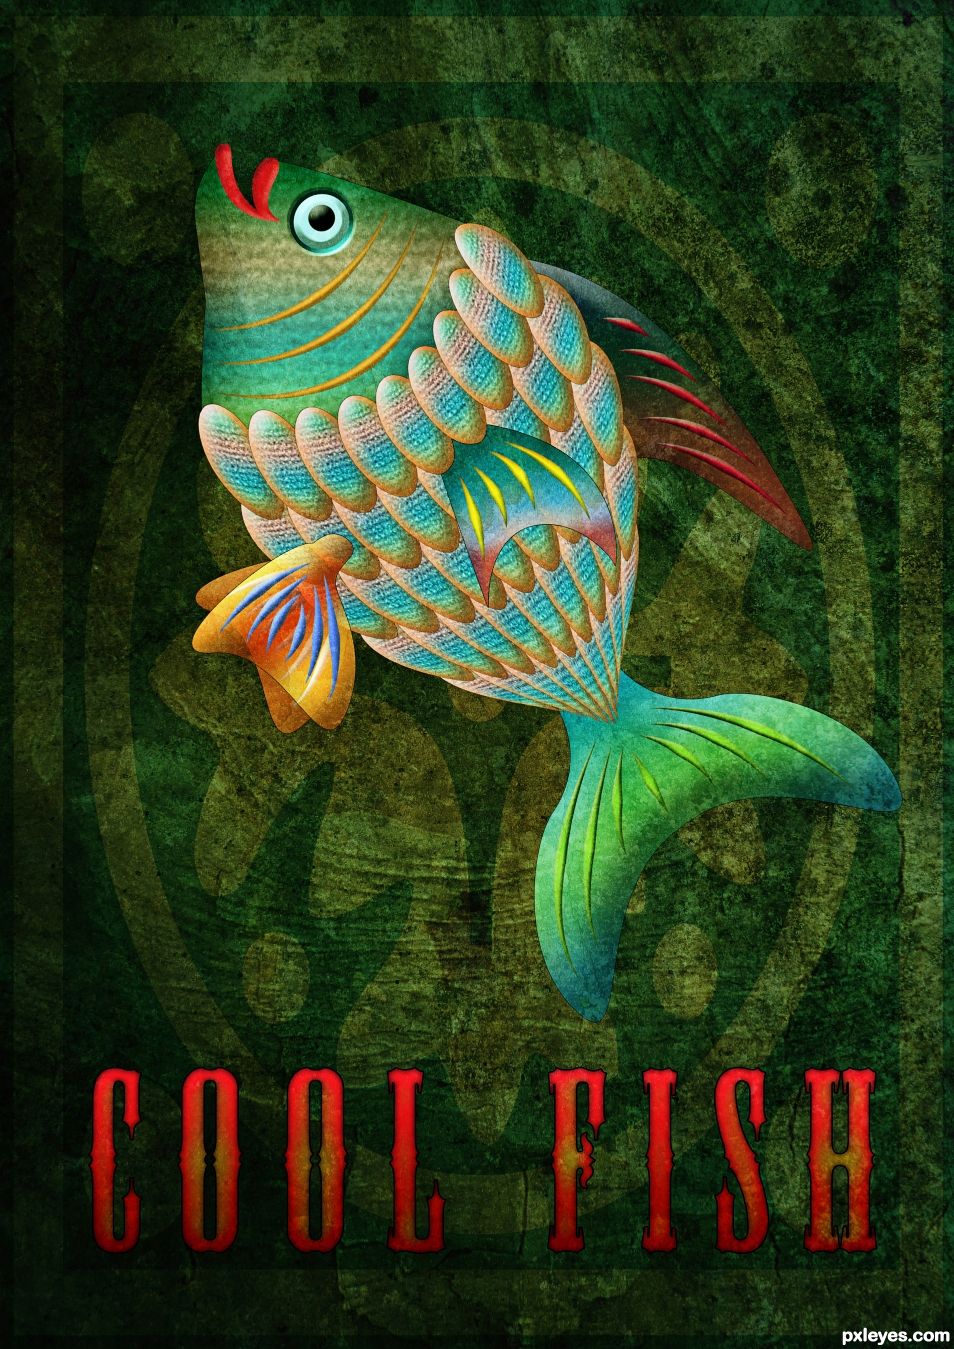 Creation of Fishy Poster: Final Result